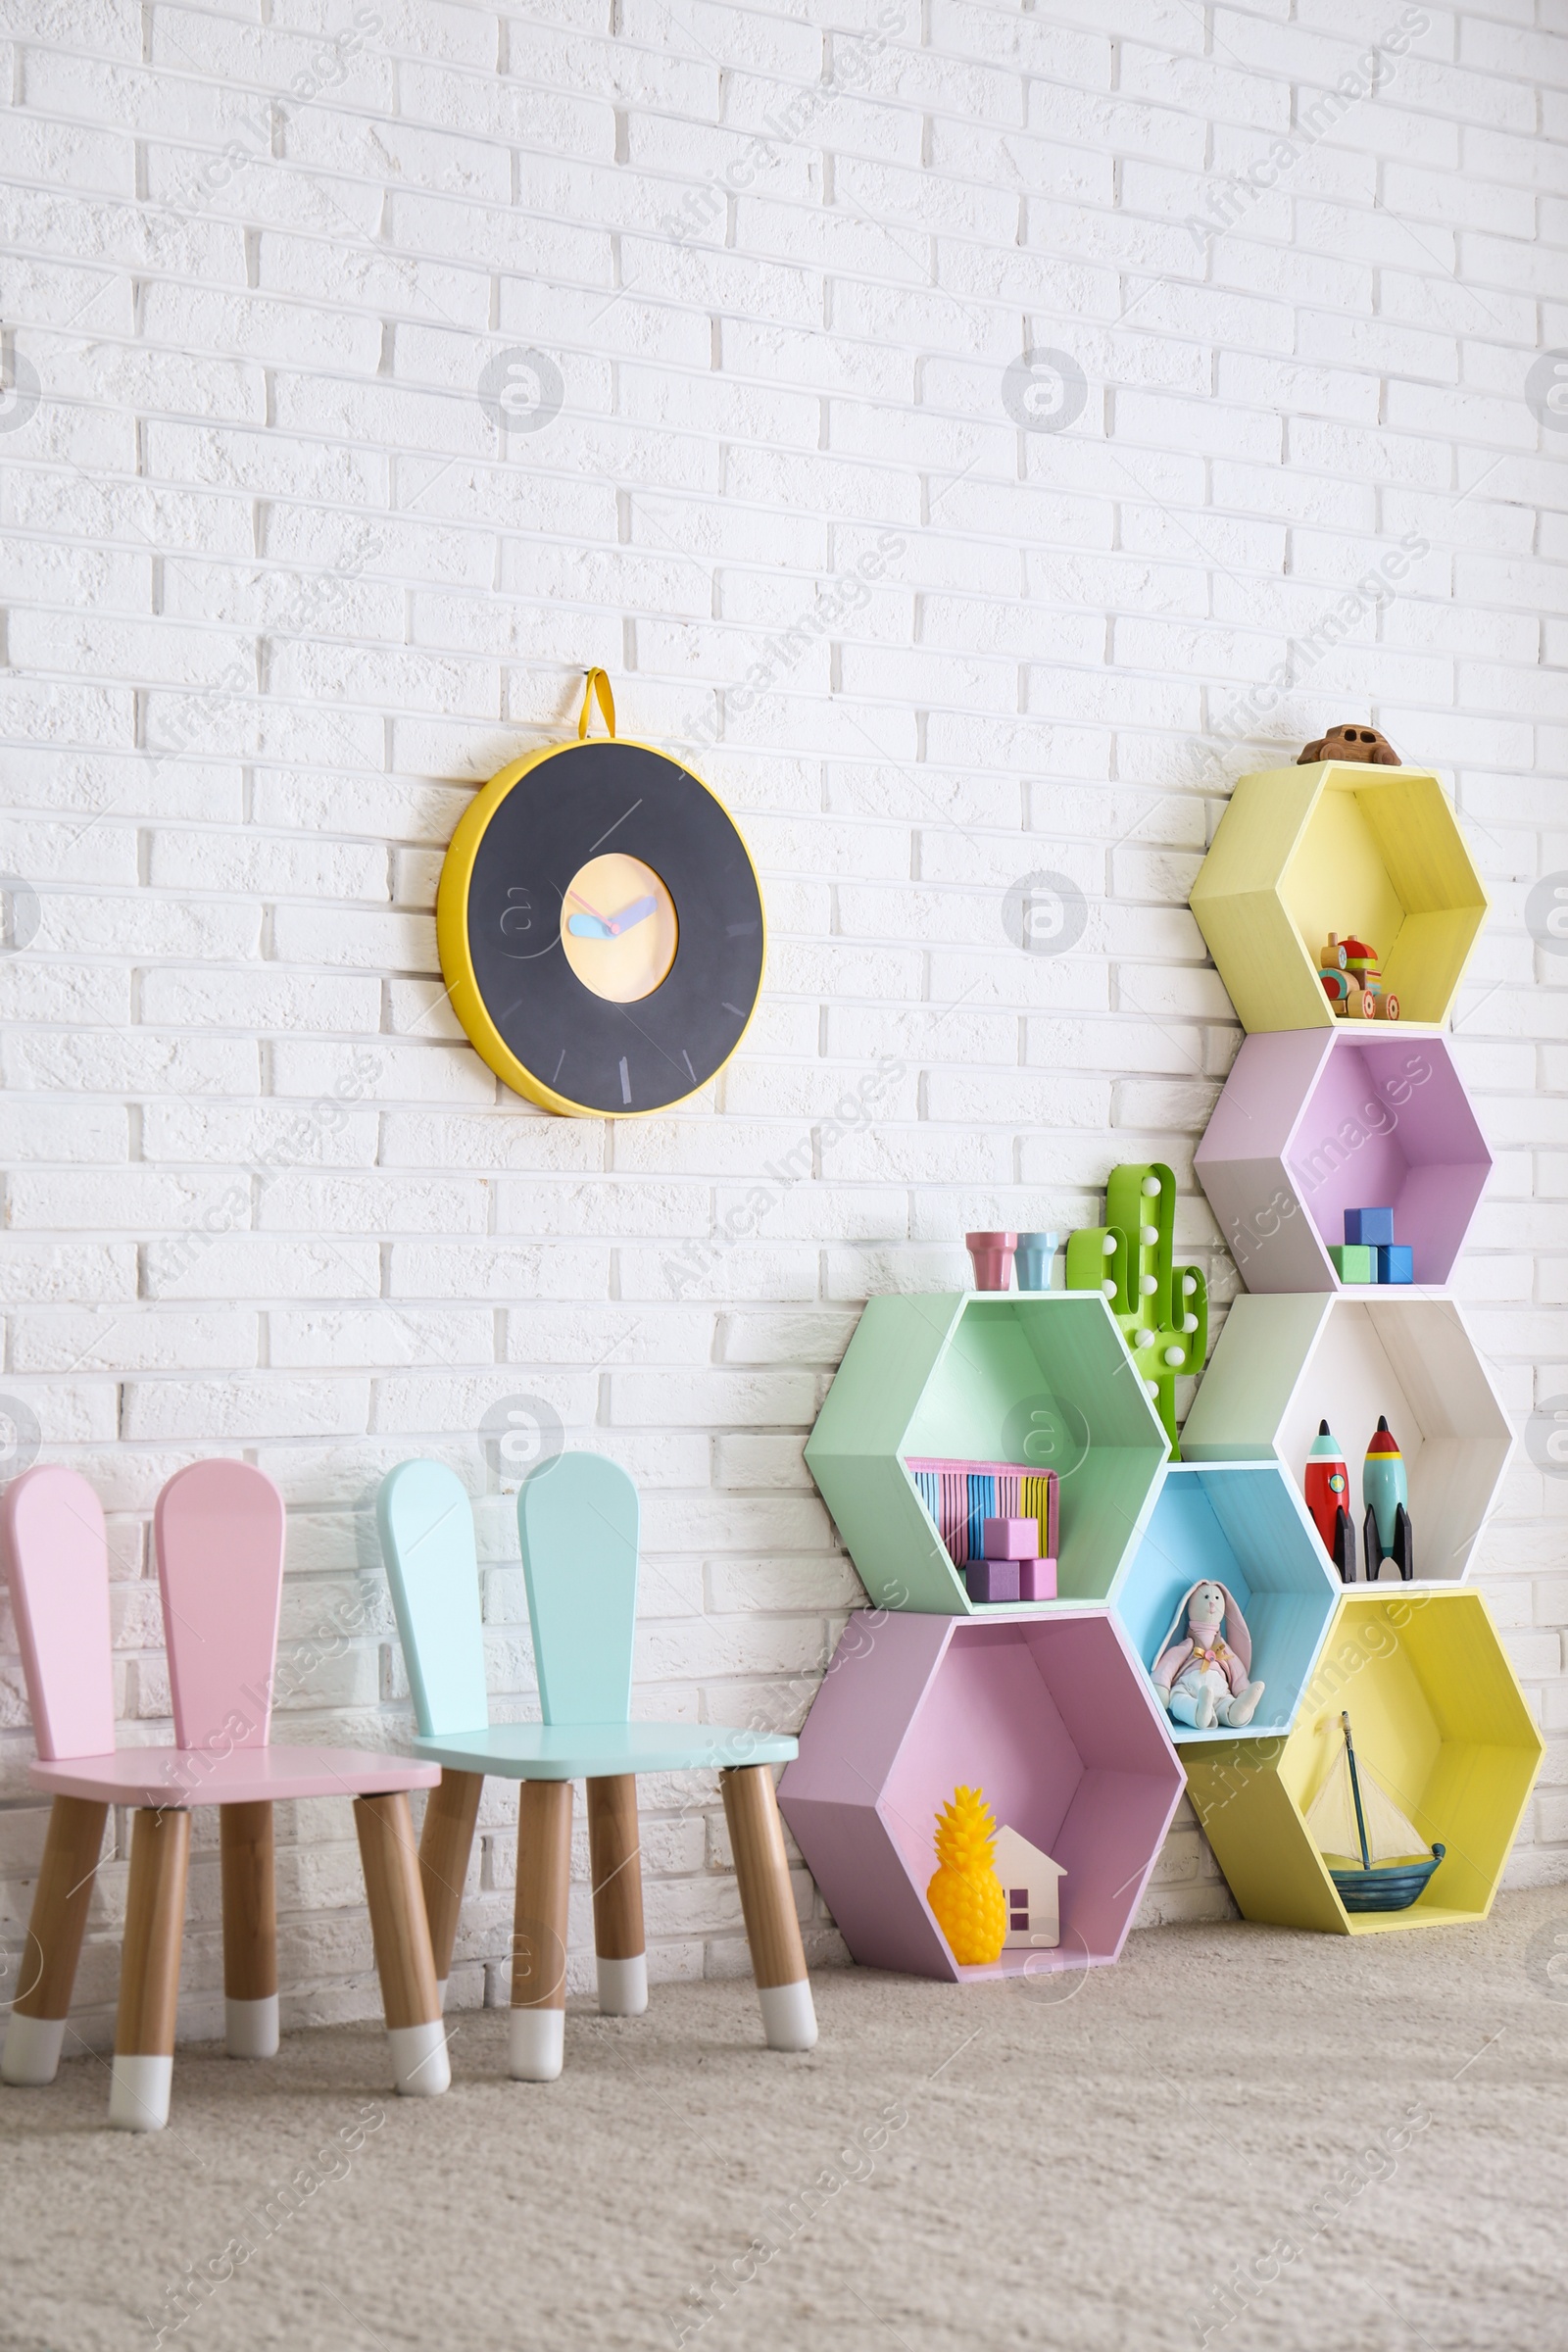 Photo of Child room interior with colorful shelves near brick wall